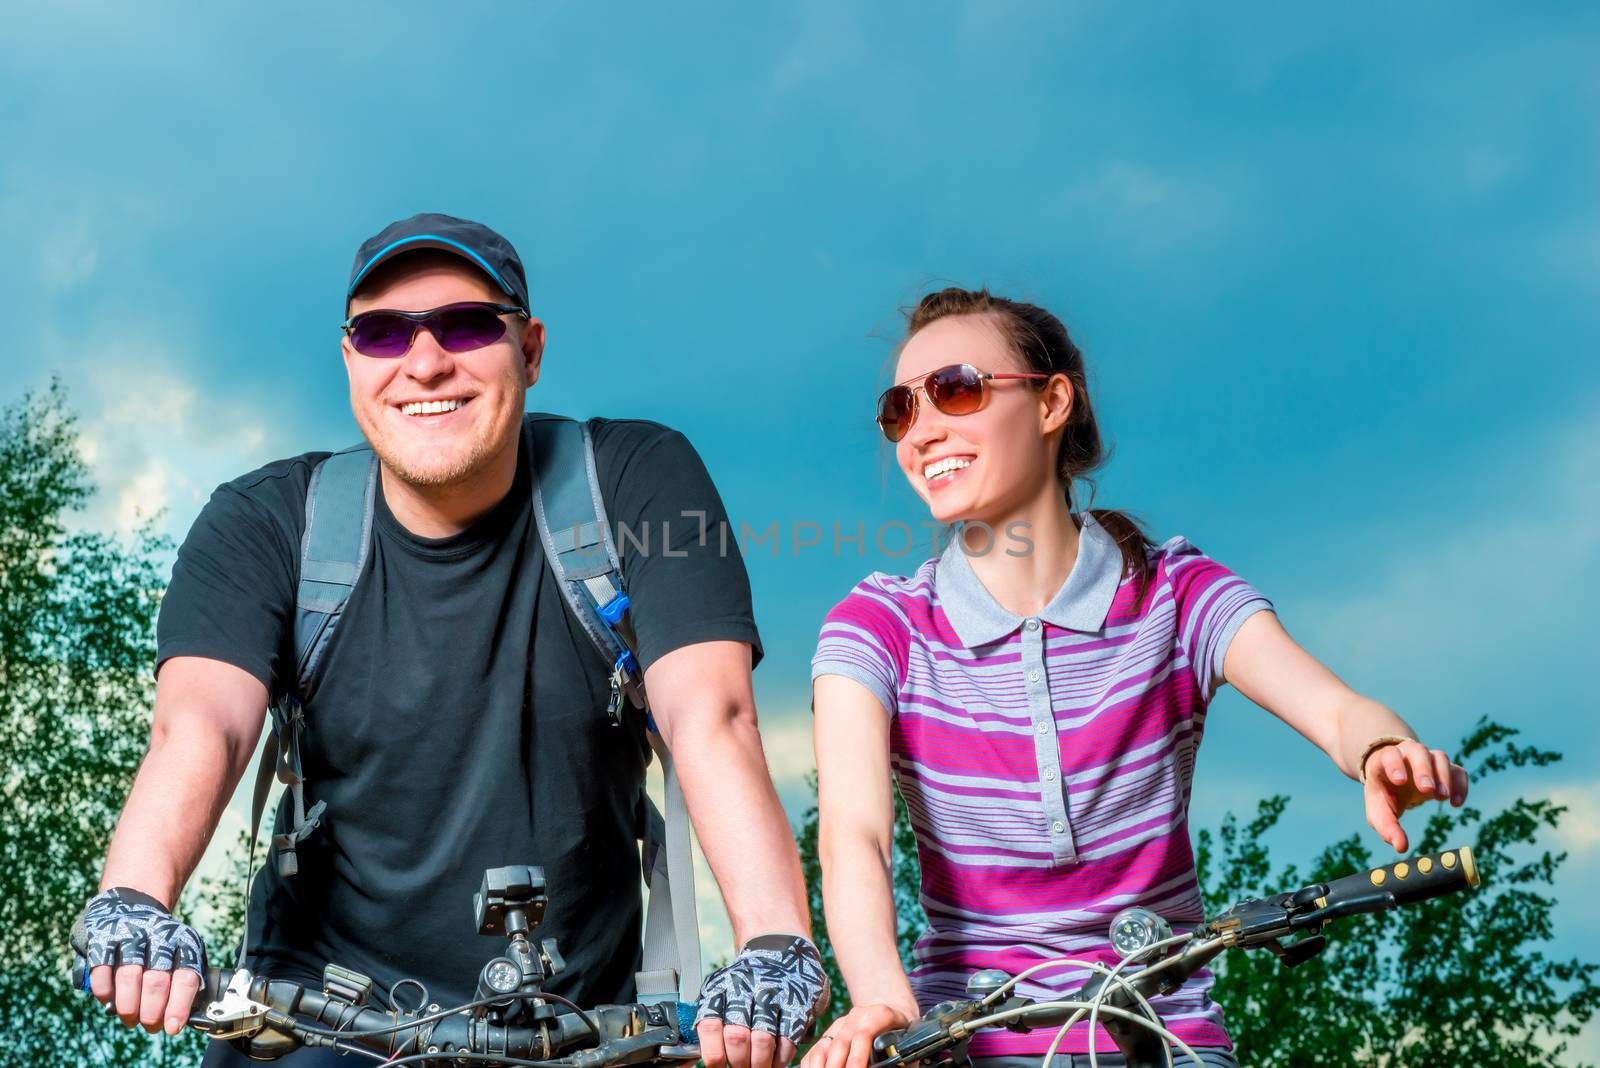 happy couple on the bike on the background of blue sky